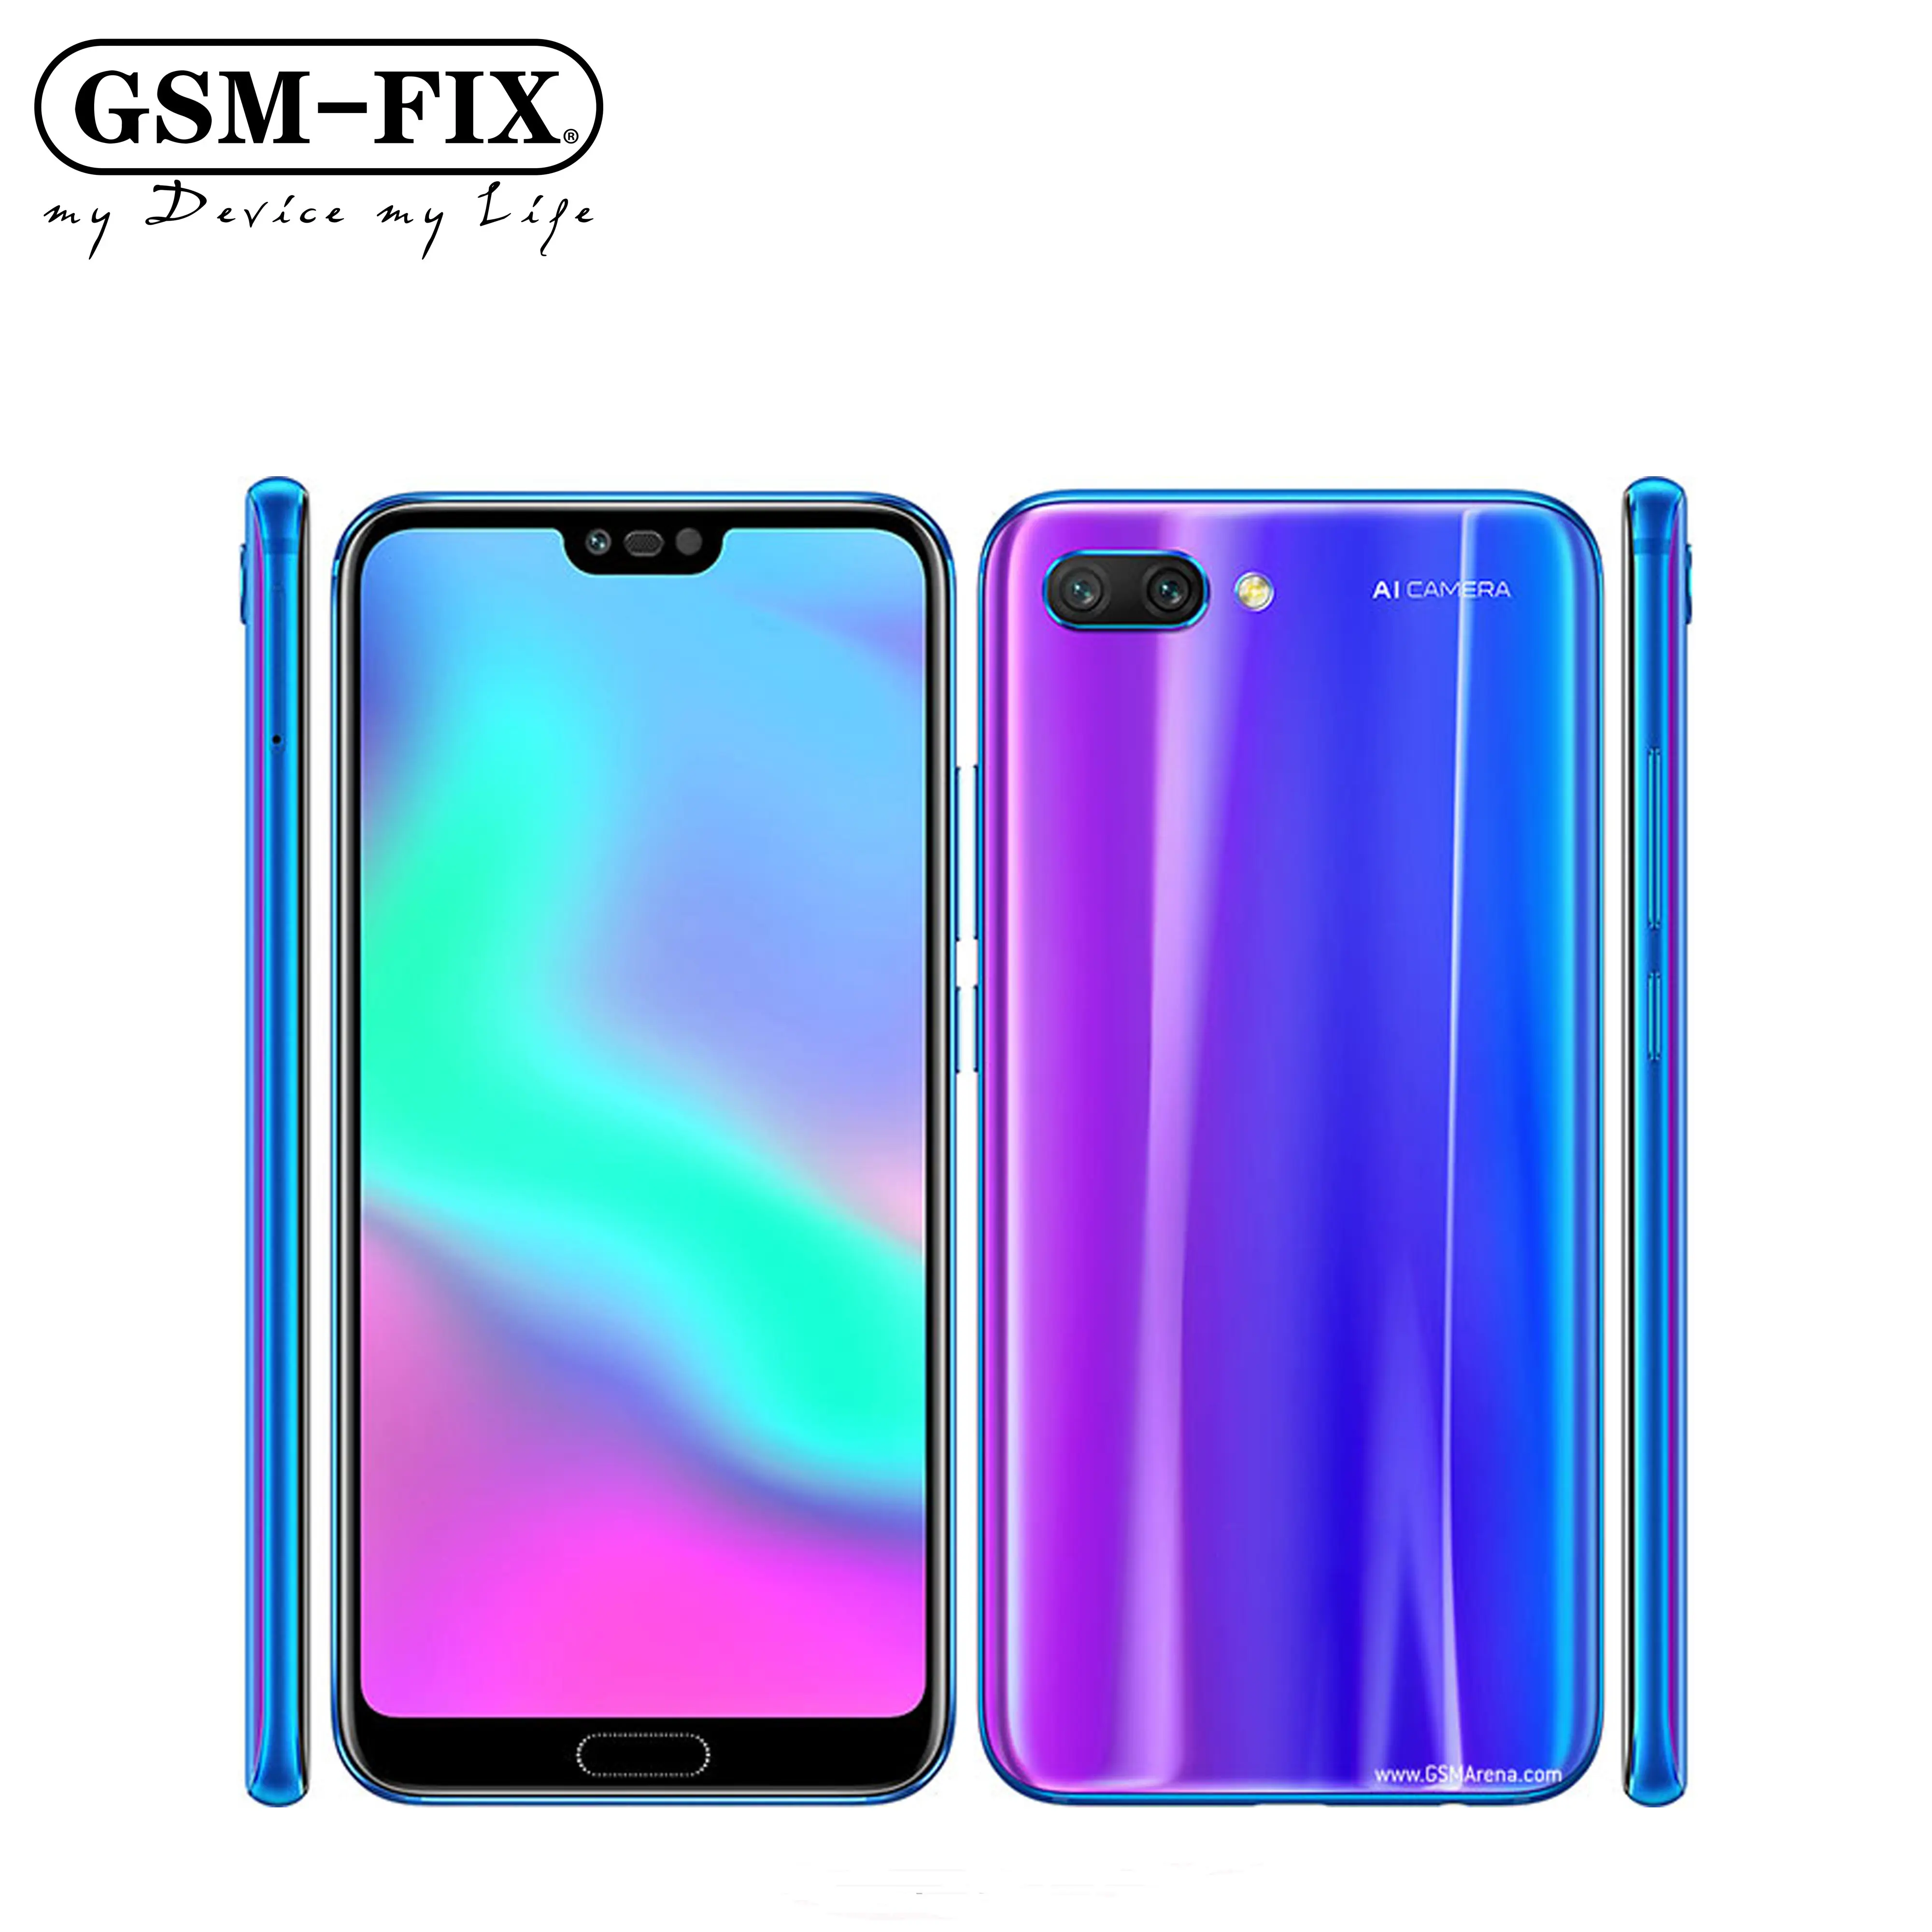 GSM-FIX 4G Smart Phone Android 9.0 Kirin 710 Octa Core 6.21" FHD 2340X1080 4GB RAM 64GB ROM 24.0MP For Honor 10